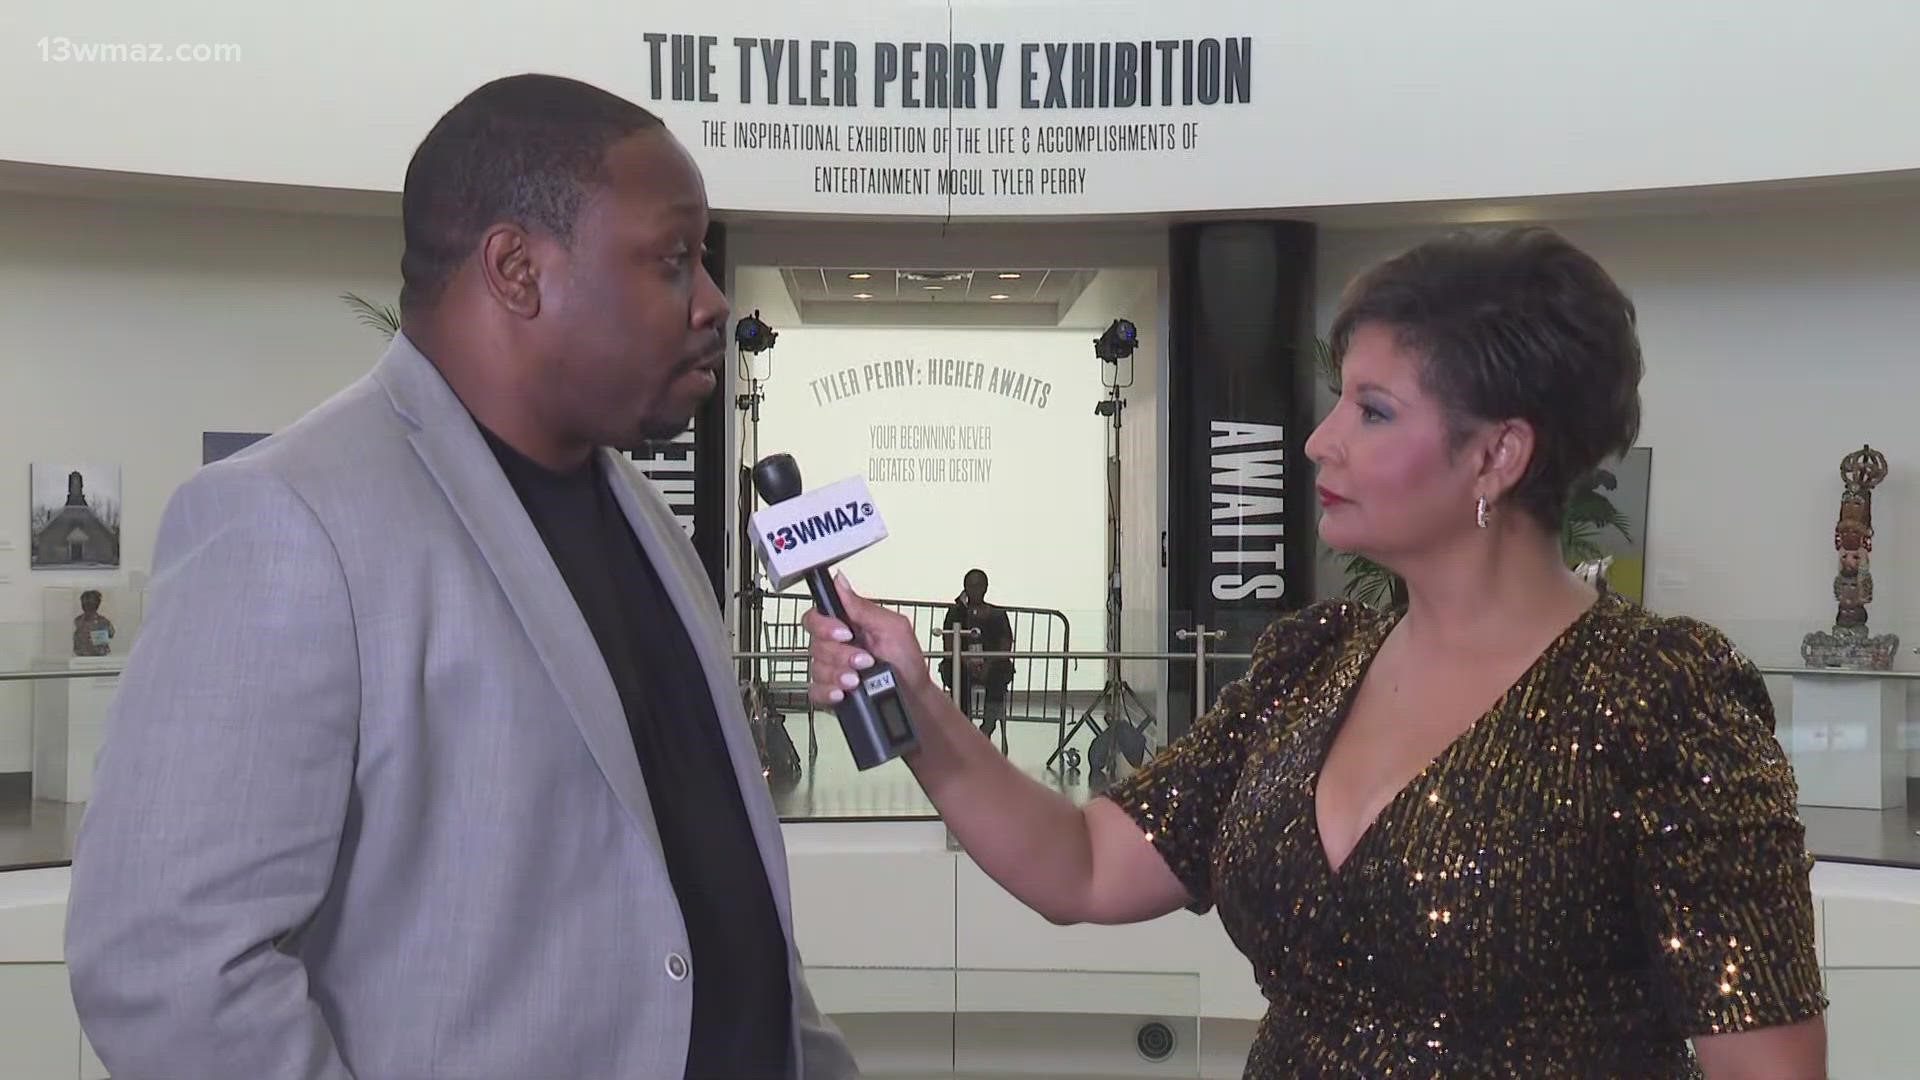 Executive Director of the Tubman Museum Harold Young says there is a lot people can learn from Tyler Perry's story.